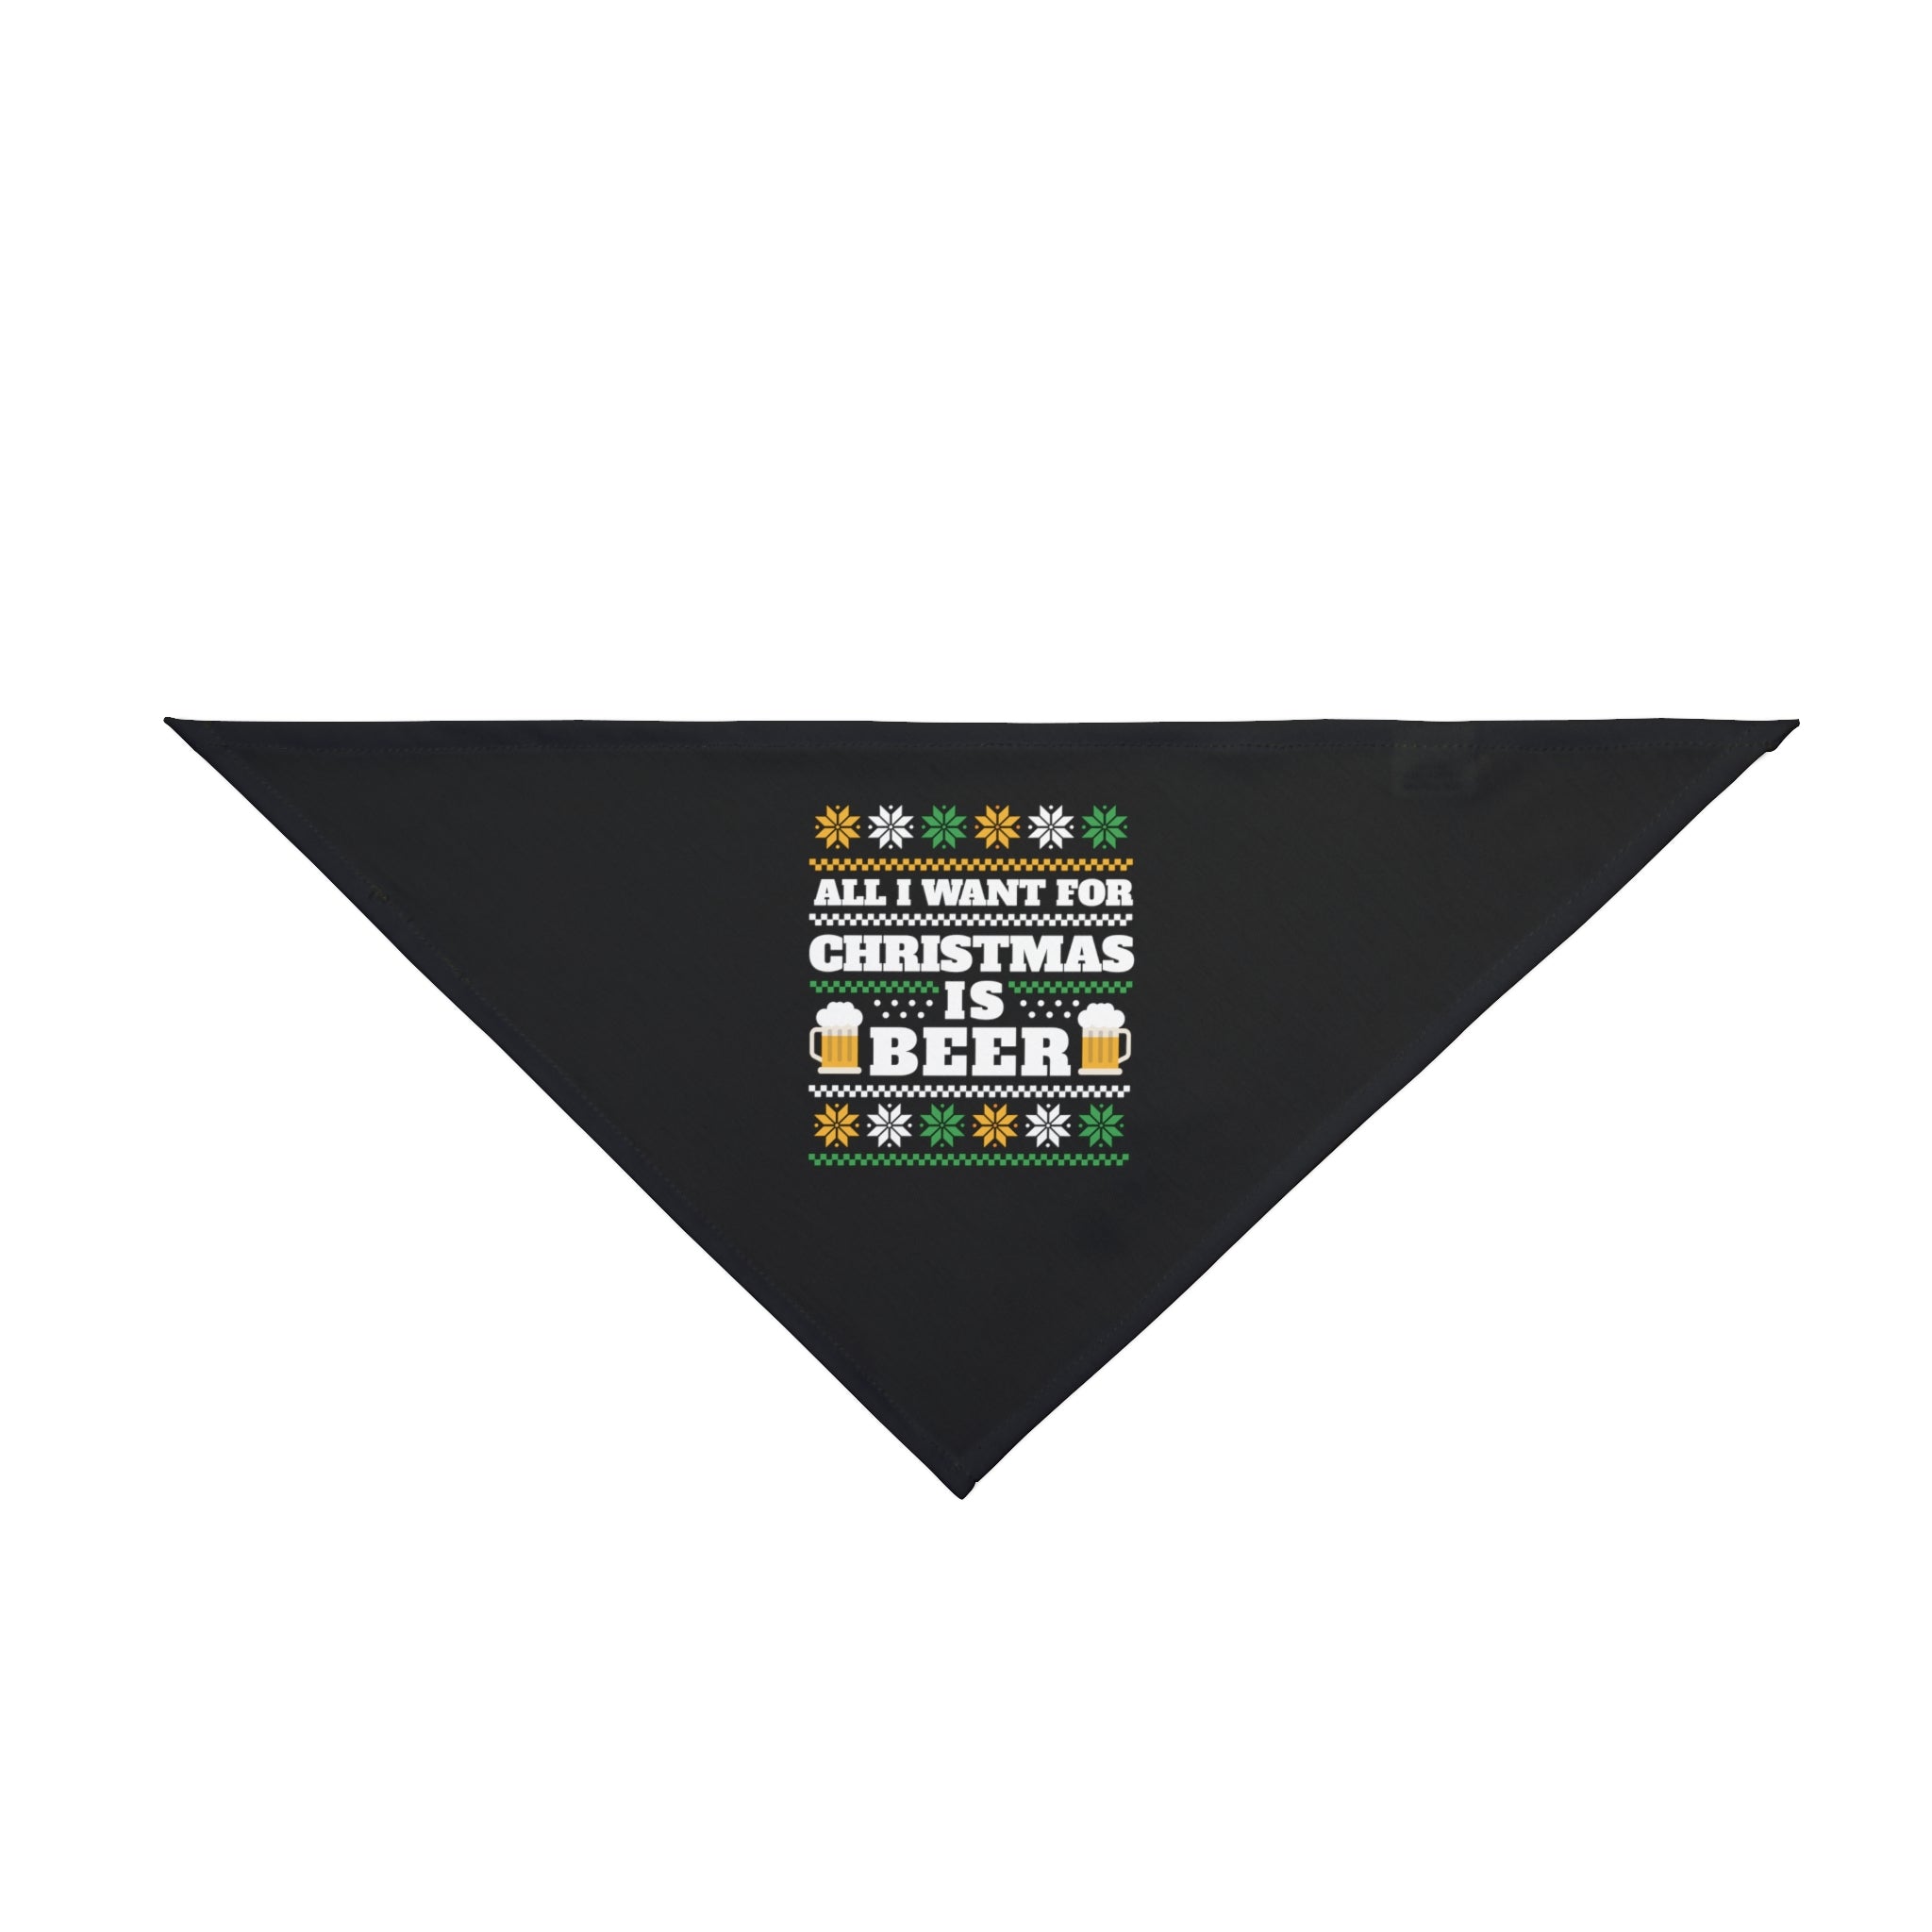 This polyester black triangular Beer Ugly Sweater - Pet Bandana features the text "All I want for Christmas is beer" amidst decorative elements, including beer mugs and winter-themed designs.